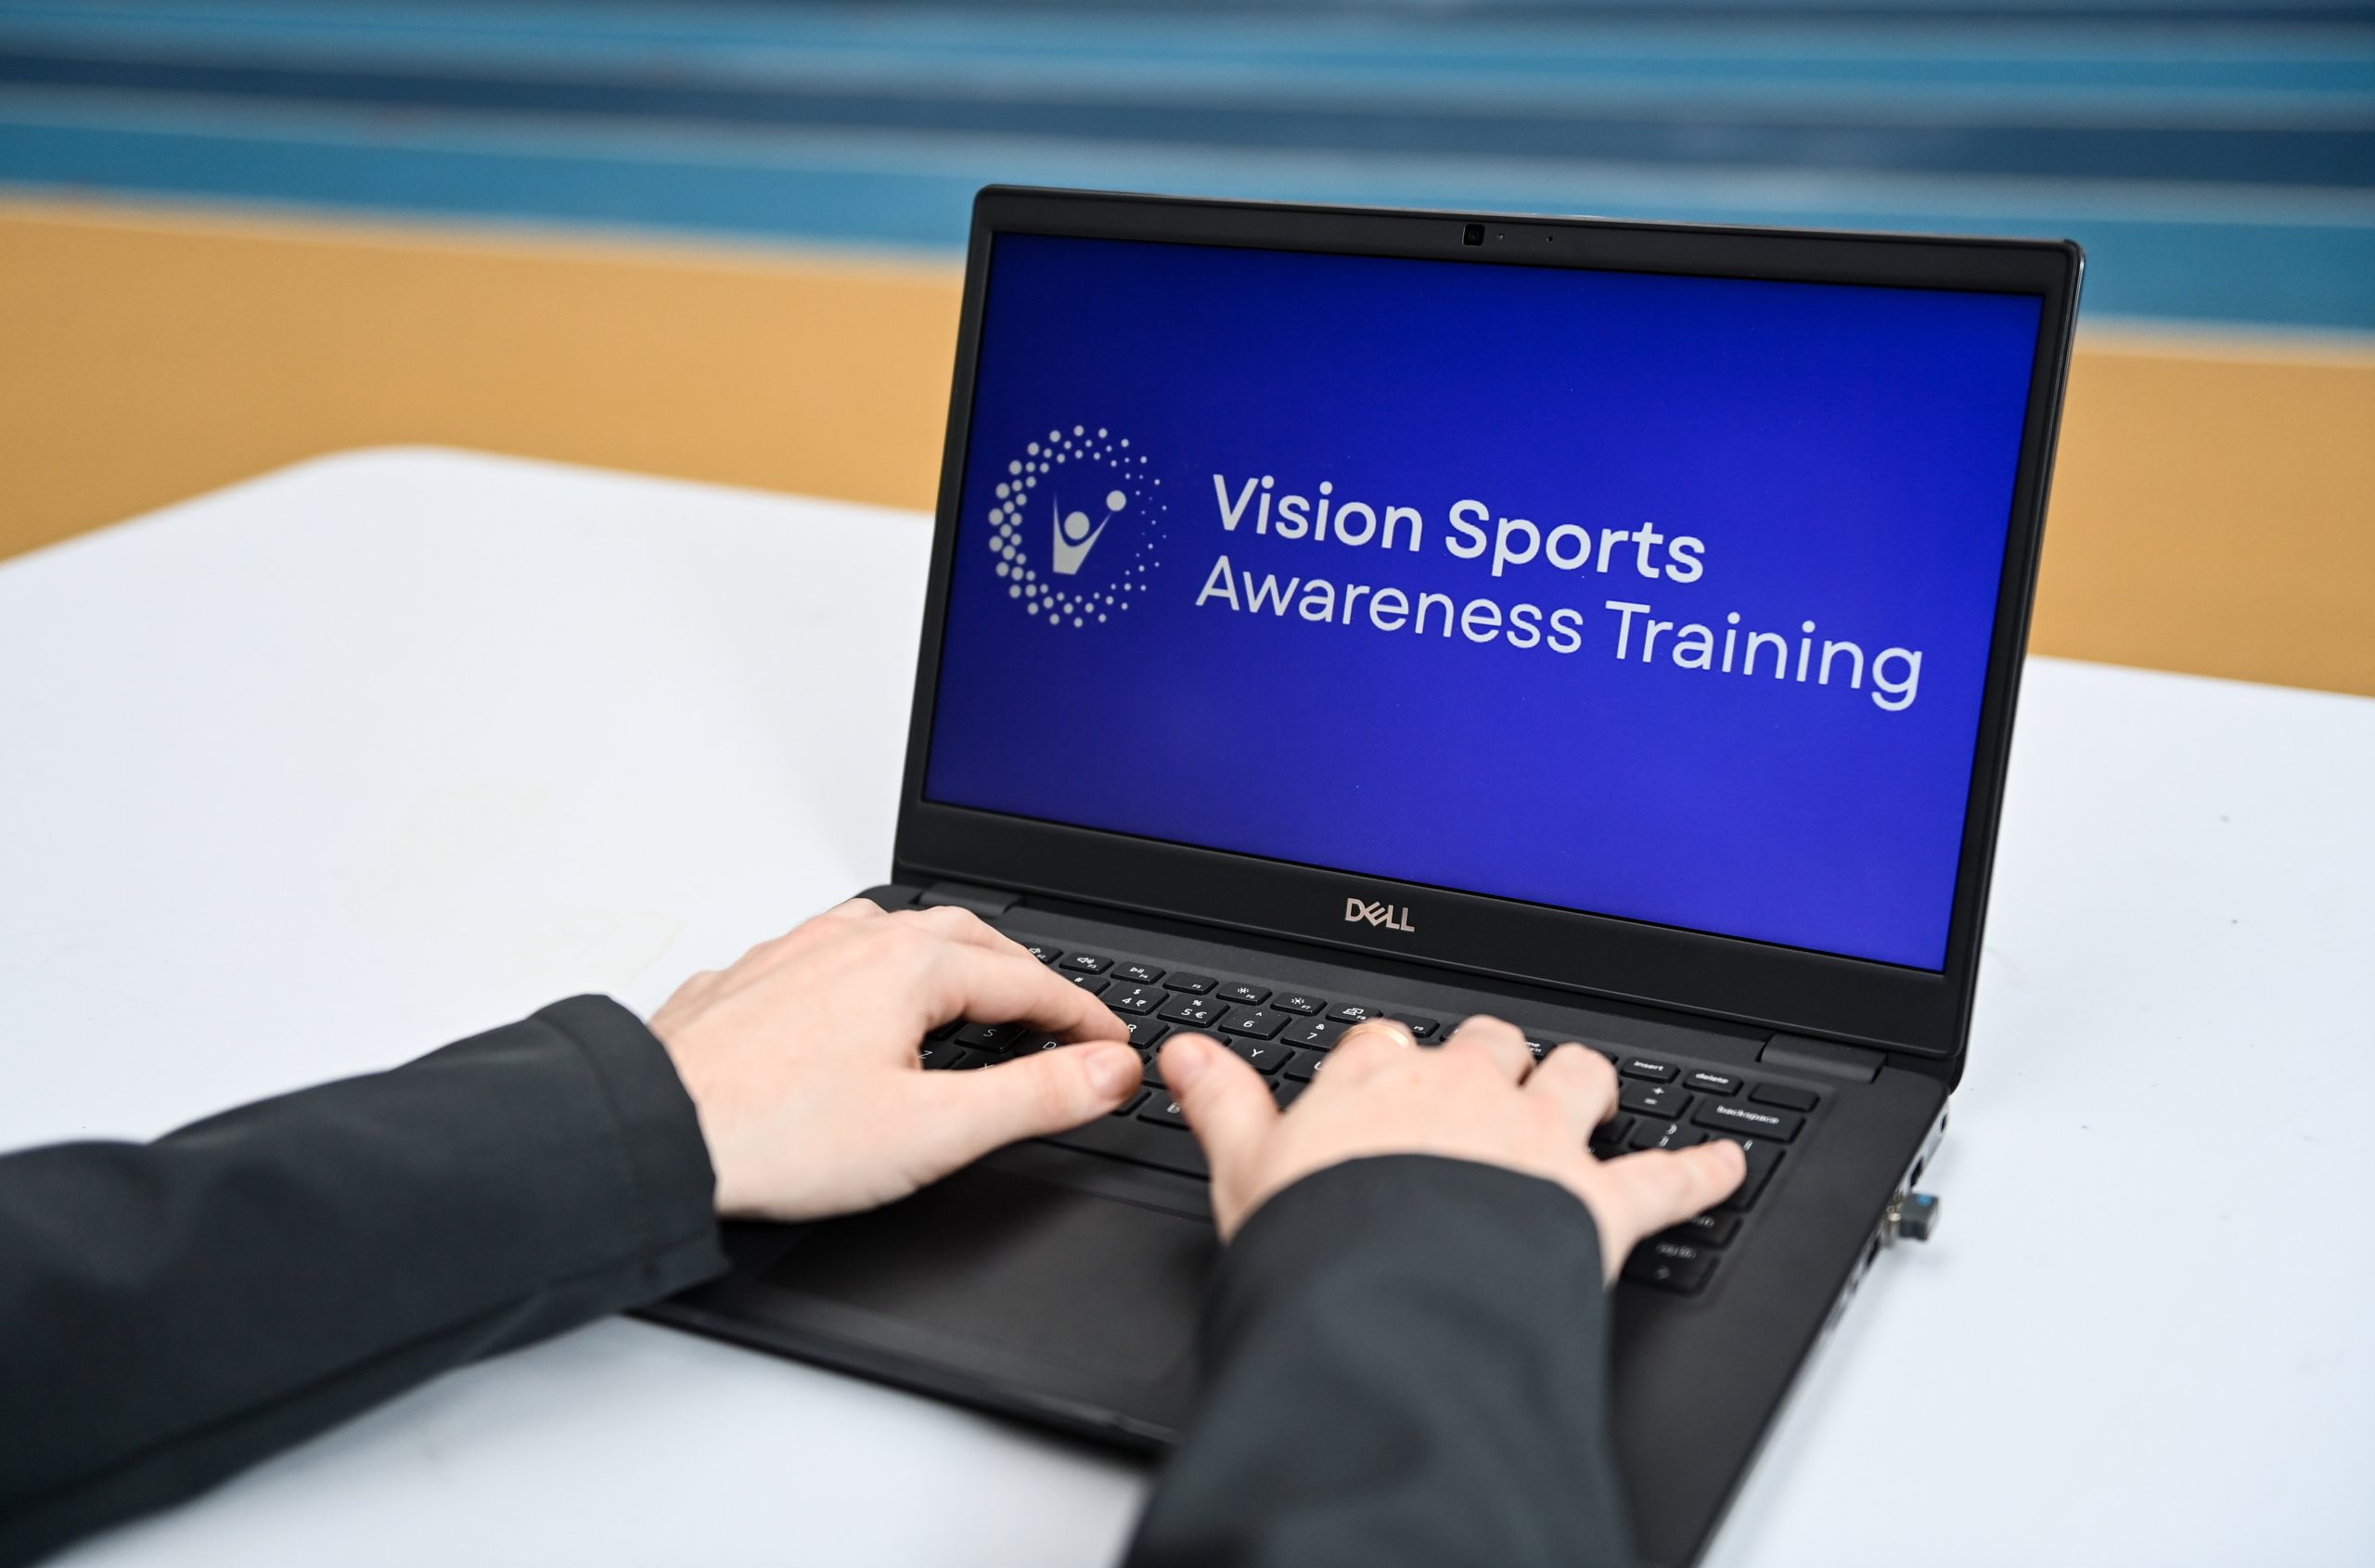 person typing on a laptop, vision sports awareness training logo displayed on the screen